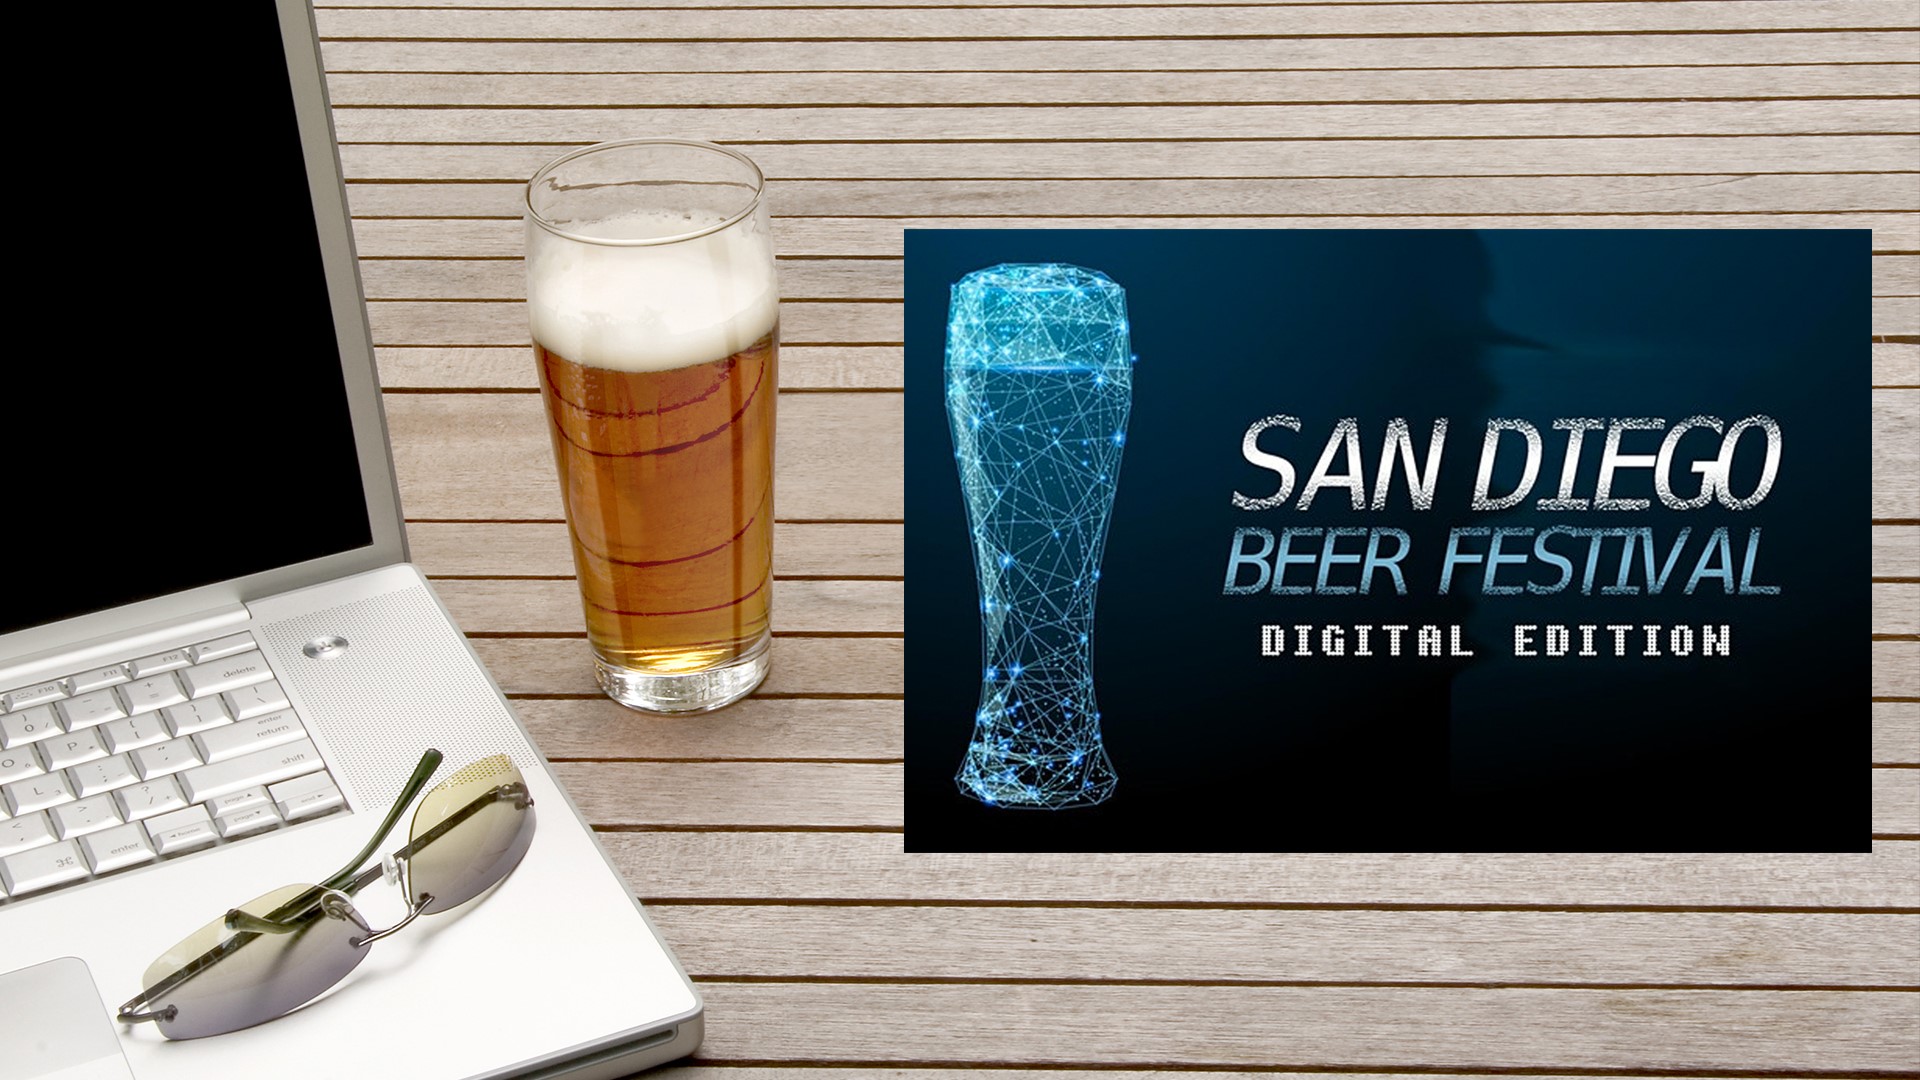 On April 25, there will be a virtual beer festival in San Diego County. The festival comes to Orange County this weekend.